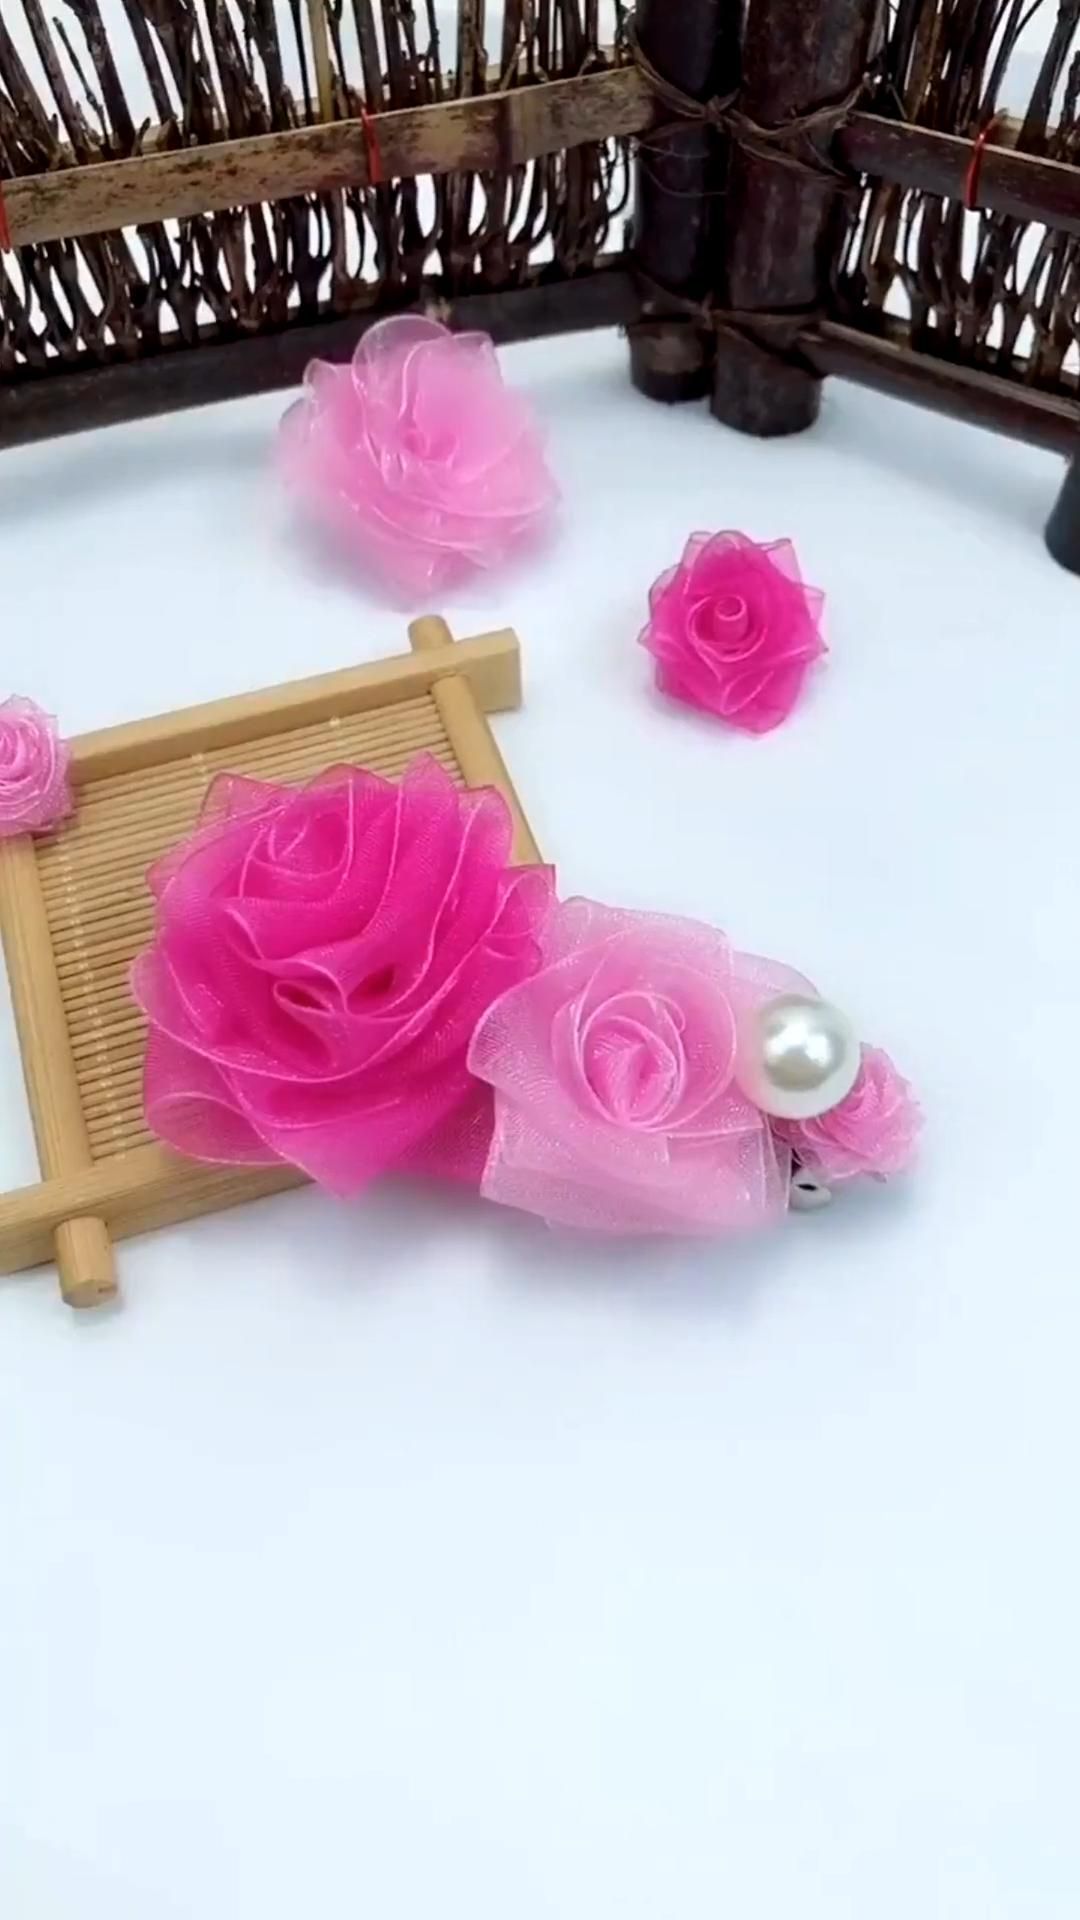 The Easy Way to Make Ribbon Flowers by Hand -   23 fabric crafts Videos art ideas